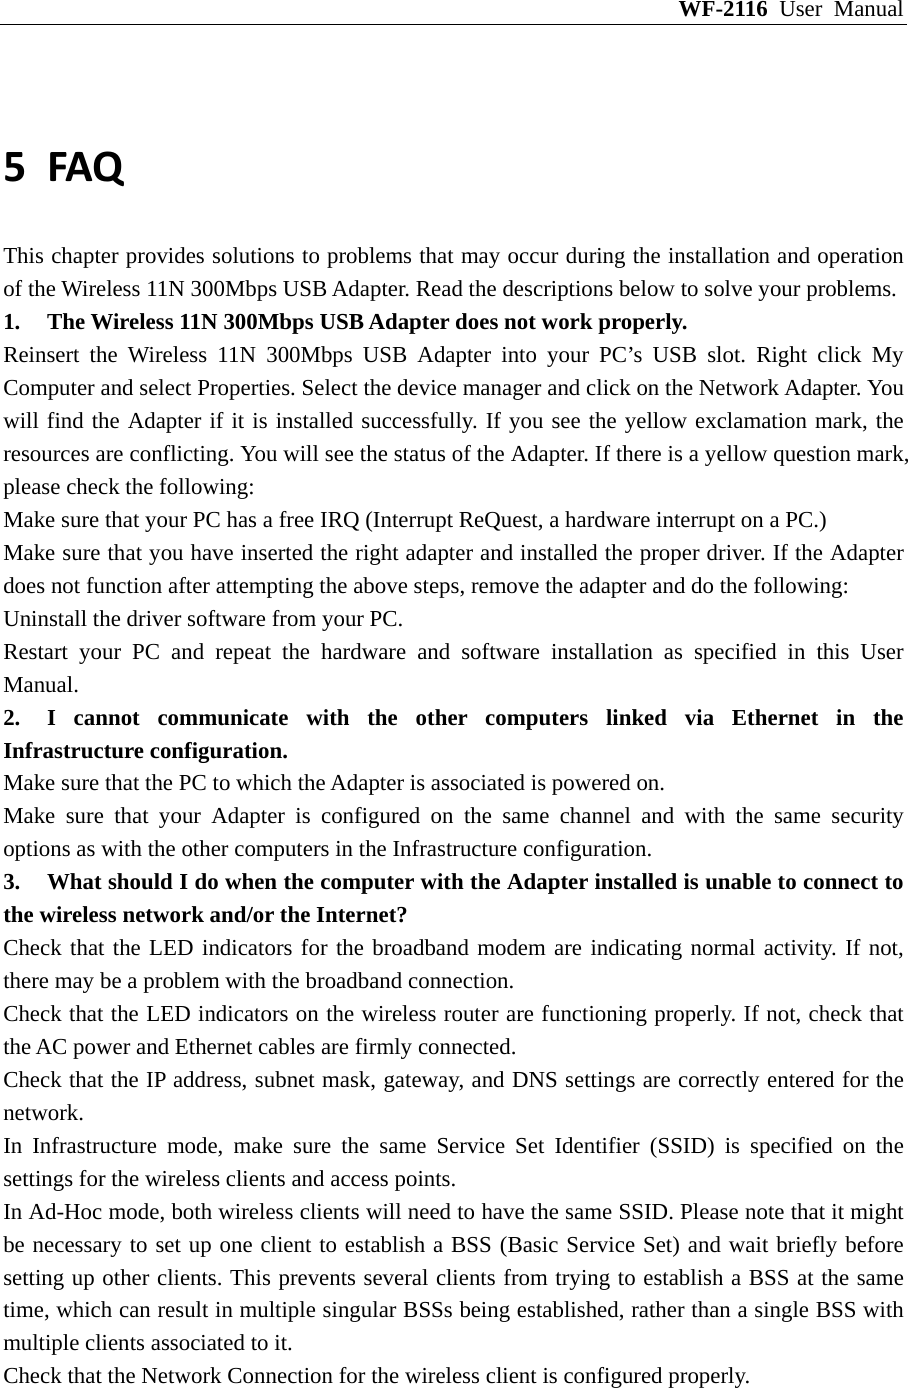 WF-2116 User Manual  5 FAQThis chapter provides solutions to problems that may occur during the installation and operation of the Wireless 11N 300Mbps USB Adapter. Read the descriptions below to solve your problems.   1.  The Wireless 11N 300Mbps USB Adapter does not work properly. Reinsert the Wireless 11N 300Mbps USB Adapter into your PC’s USB slot. Right click My Computer and select Properties. Select the device manager and click on the Network Adapter. You will find the Adapter if it is installed successfully. If you see the yellow exclamation mark, the resources are conflicting. You will see the status of the Adapter. If there is a yellow question mark, please check the following: Make sure that your PC has a free IRQ (Interrupt ReQuest, a hardware interrupt on a PC.) Make sure that you have inserted the right adapter and installed the proper driver. If the Adapter does not function after attempting the above steps, remove the adapter and do the following: Uninstall the driver software from your PC. Restart your PC and repeat the hardware and software installation as specified in this User Manual. 2.  I cannot communicate with the other computers linked via Ethernet in the Infrastructure configuration. Make sure that the PC to which the Adapter is associated is powered on. Make sure that your Adapter is configured on the same channel and with the same security options as with the other computers in the Infrastructure configuration. 3.  What should I do when the computer with the Adapter installed is unable to connect to the wireless network and/or the Internet? Check that the LED indicators for the broadband modem are indicating normal activity. If not, there may be a problem with the broadband connection. Check that the LED indicators on the wireless router are functioning properly. If not, check that the AC power and Ethernet cables are firmly connected. Check that the IP address, subnet mask, gateway, and DNS settings are correctly entered for the network. In Infrastructure mode, make sure the same Service Set Identifier (SSID) is specified on the settings for the wireless clients and access points. In Ad-Hoc mode, both wireless clients will need to have the same SSID. Please note that it might be necessary to set up one client to establish a BSS (Basic Service Set) and wait briefly before setting up other clients. This prevents several clients from trying to establish a BSS at the same time, which can result in multiple singular BSSs being established, rather than a single BSS with multiple clients associated to it. Check that the Network Connection for the wireless client is configured properly. 